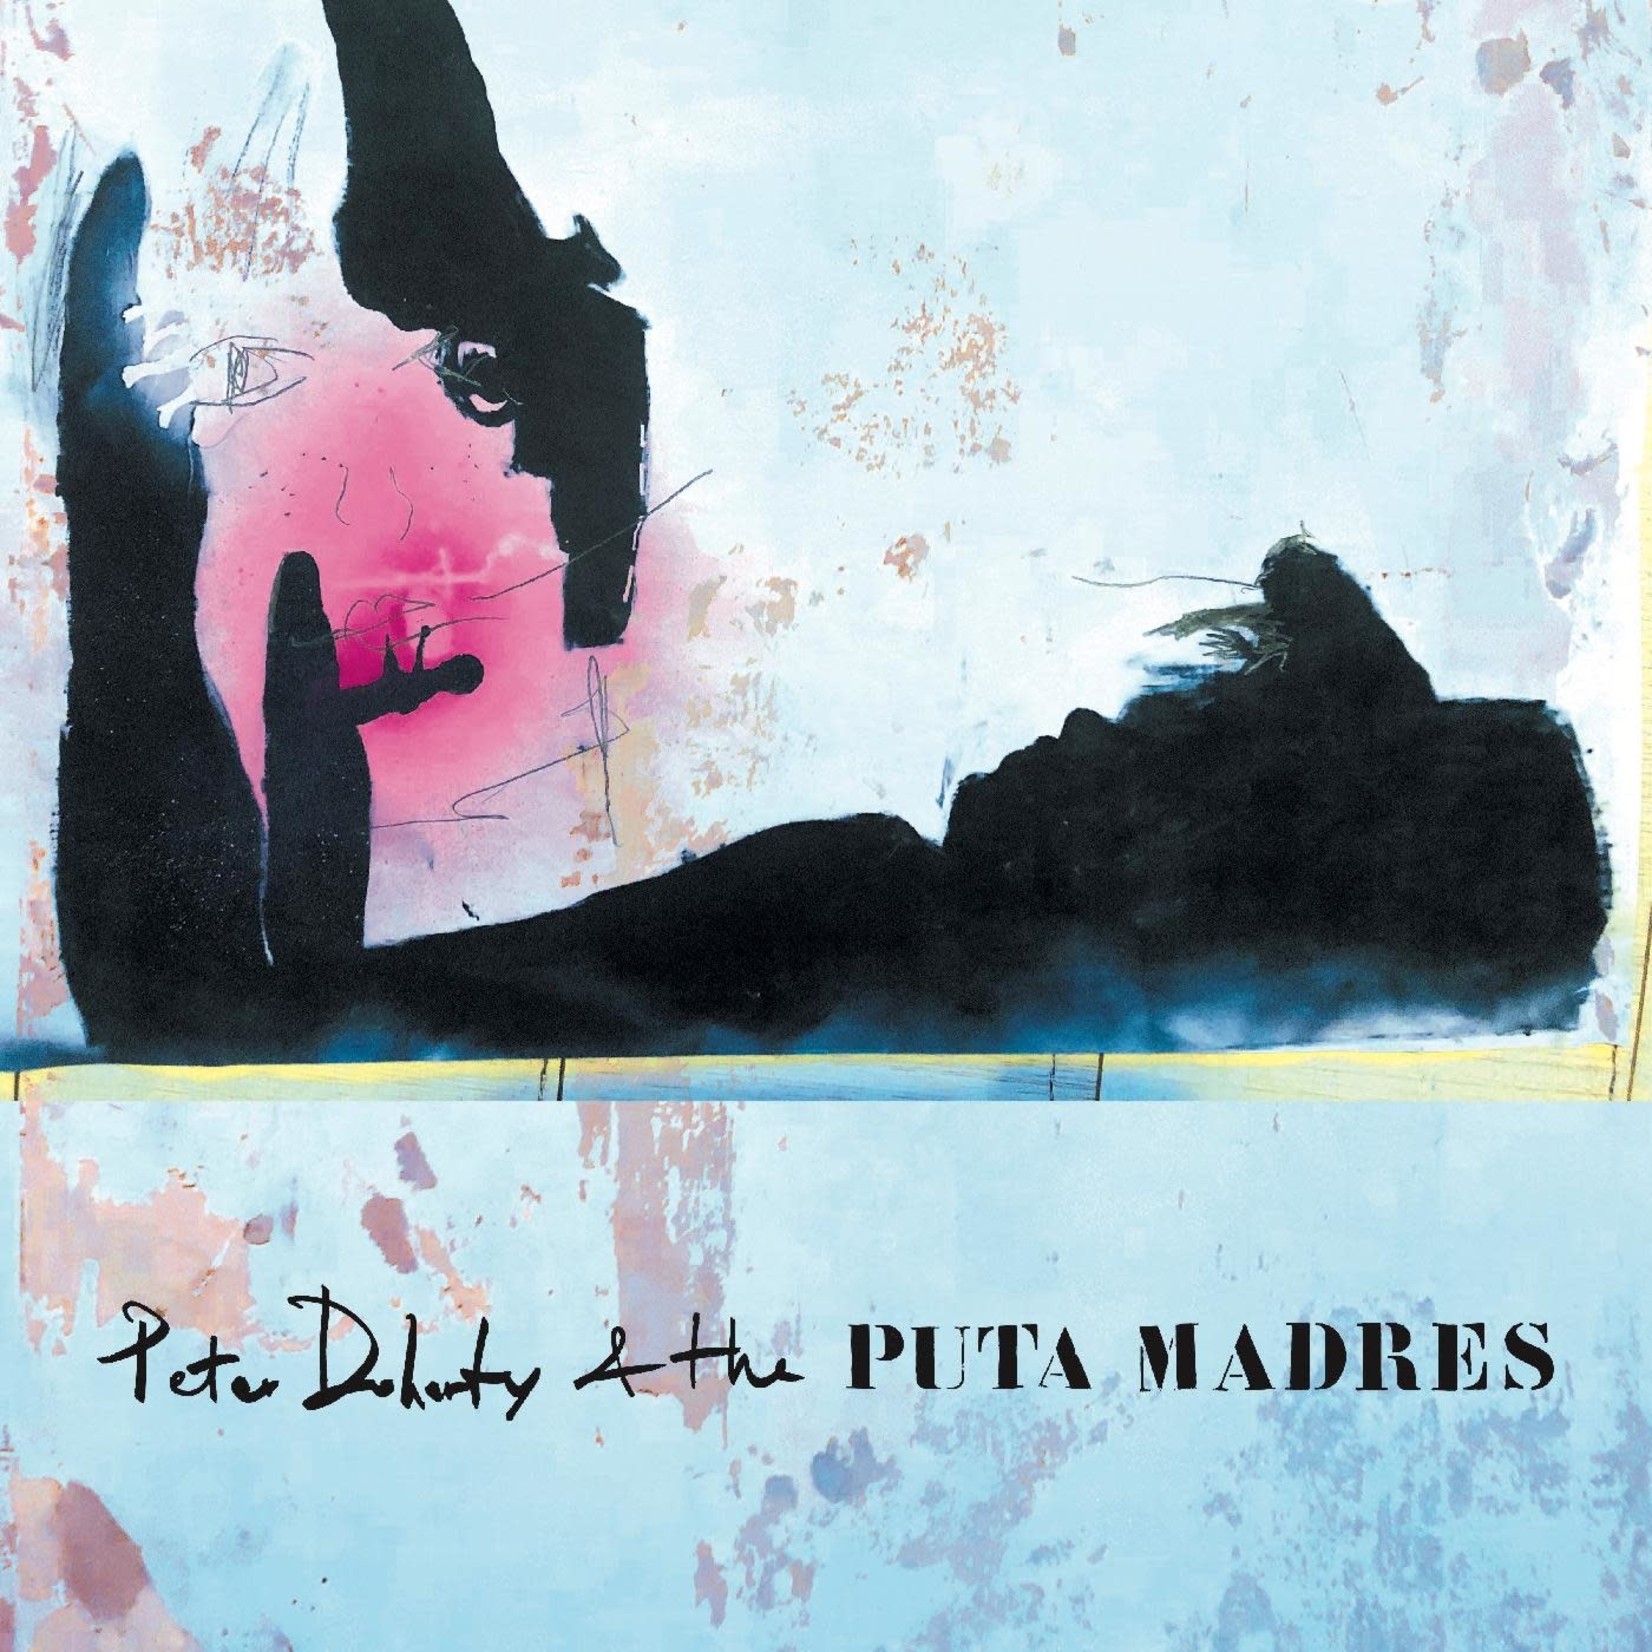 Peter Doherty & The Puta Madres - Peter Doherty & The Puta Madres (LP) [Clear]